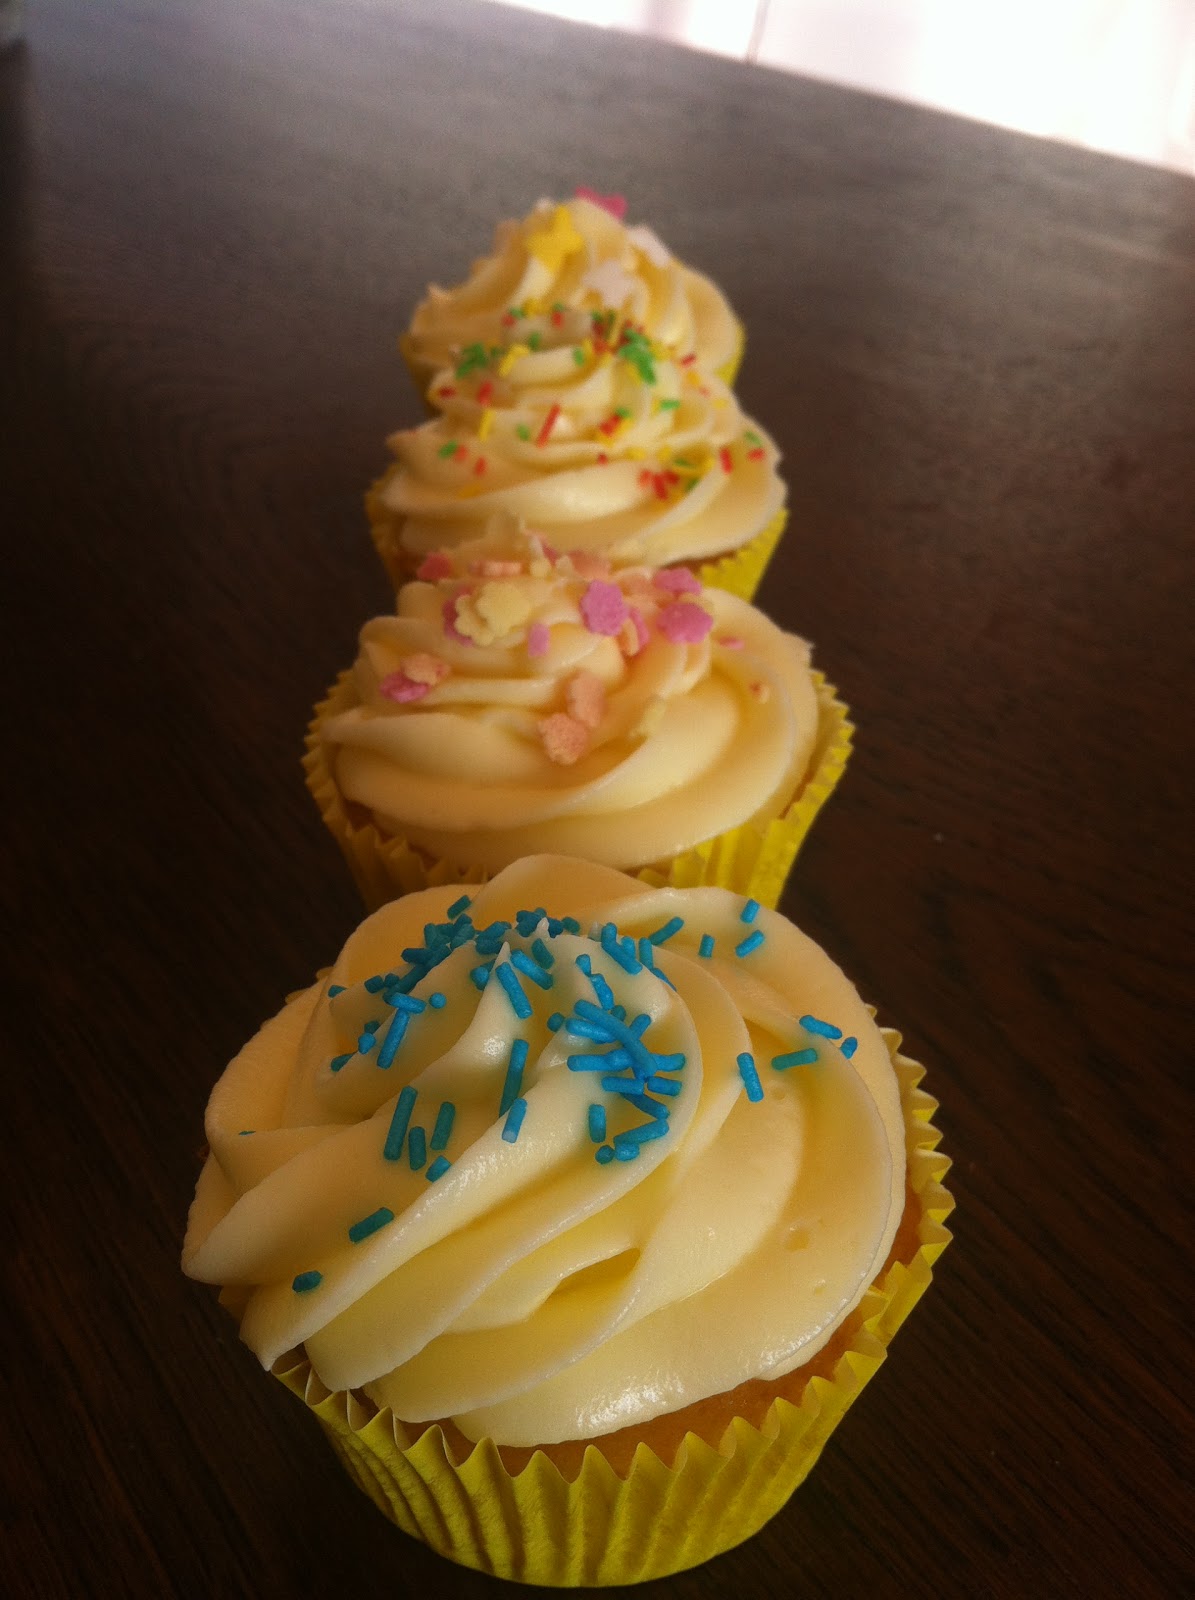 Dancing Cupcakes: Pfirsich-Cupcakes mit Buttercreme!